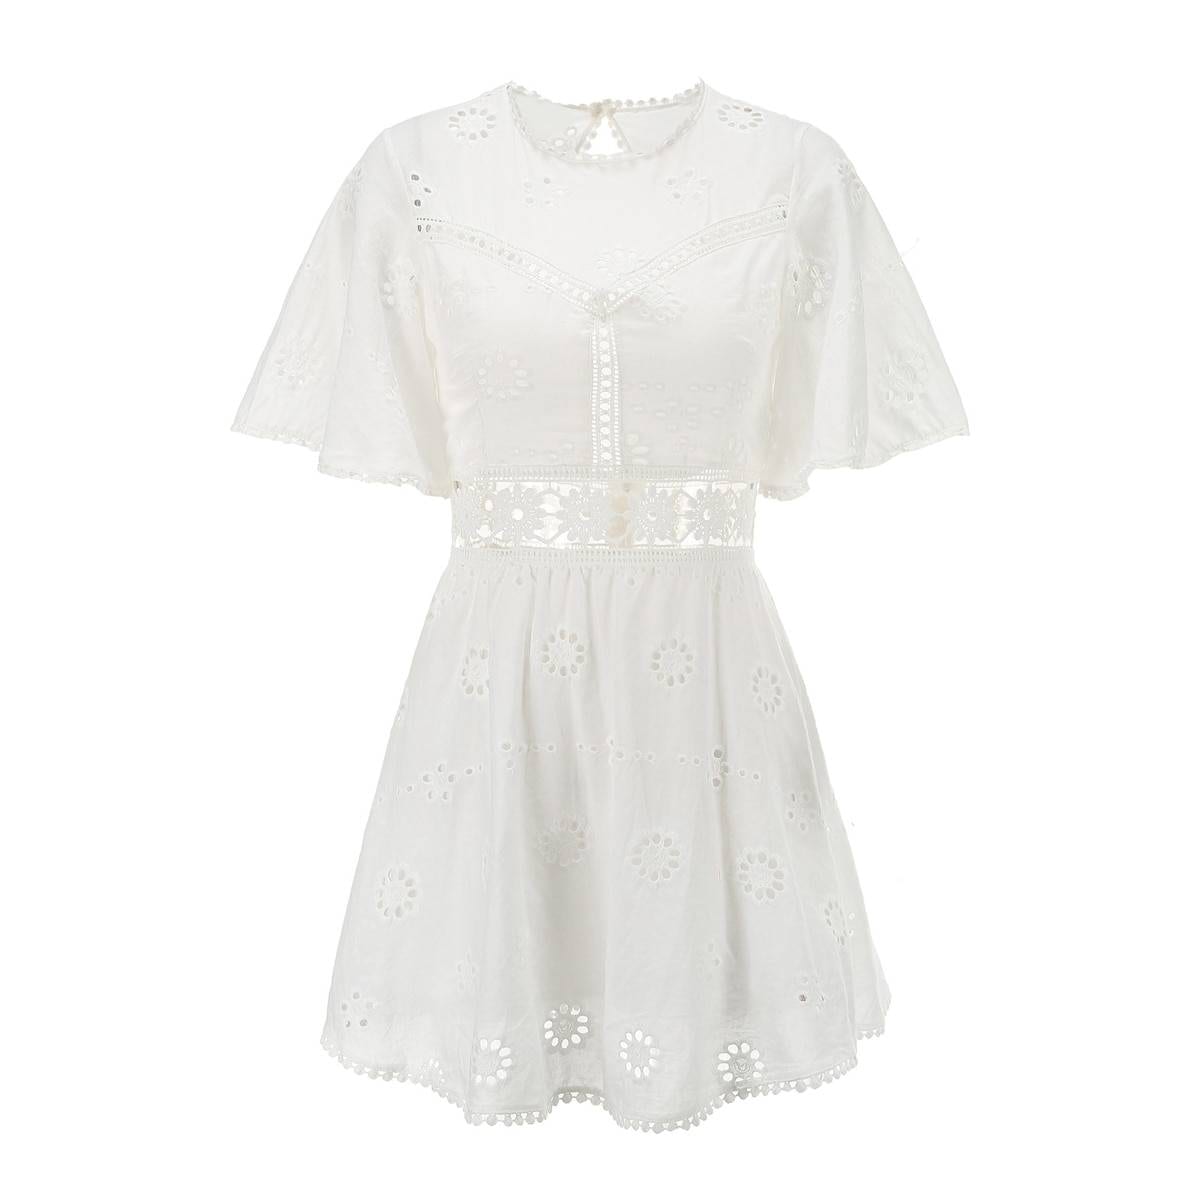 White High Waist Floral Embroidery Cotton Backless Mini Dress in Dresses